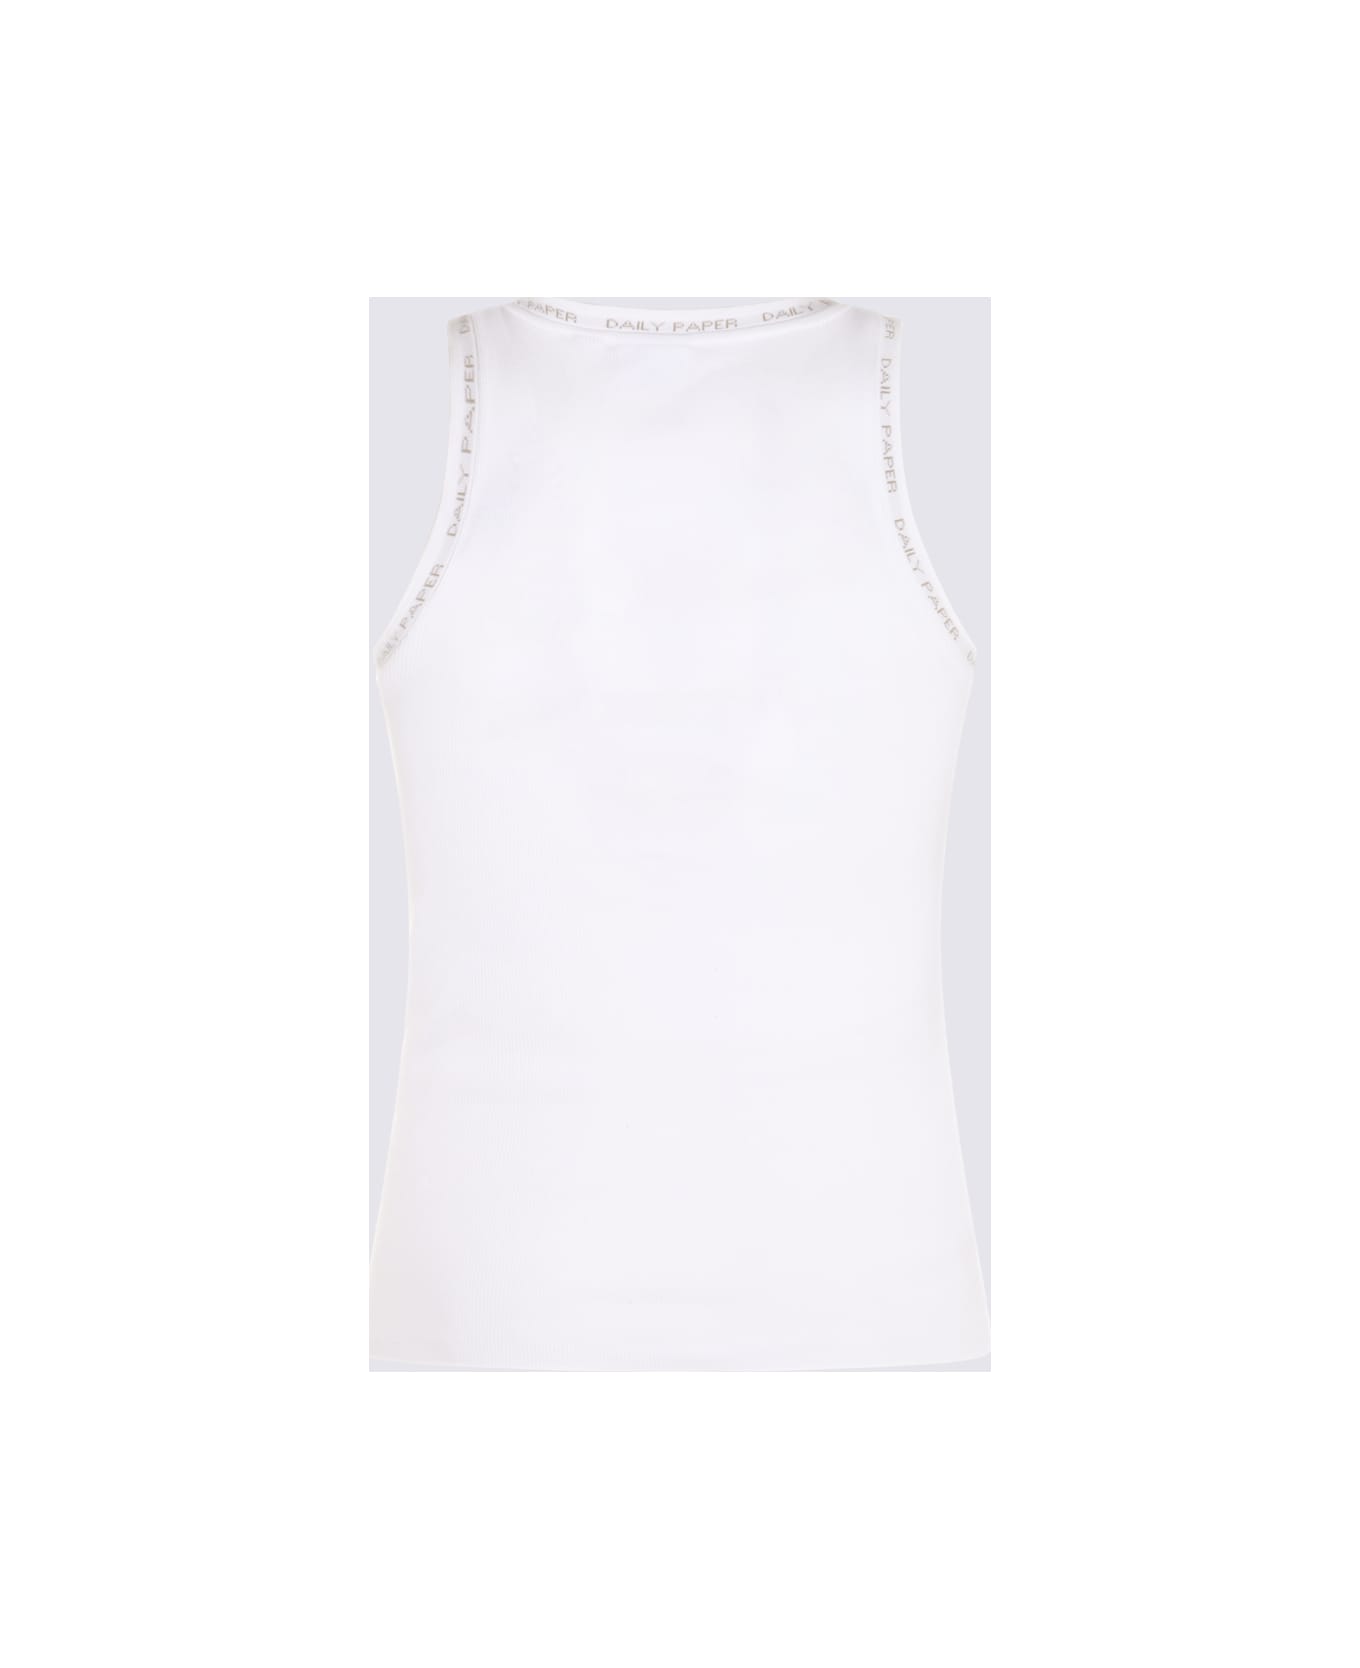 Daily Paper White And Black Cotton Tank Top - White